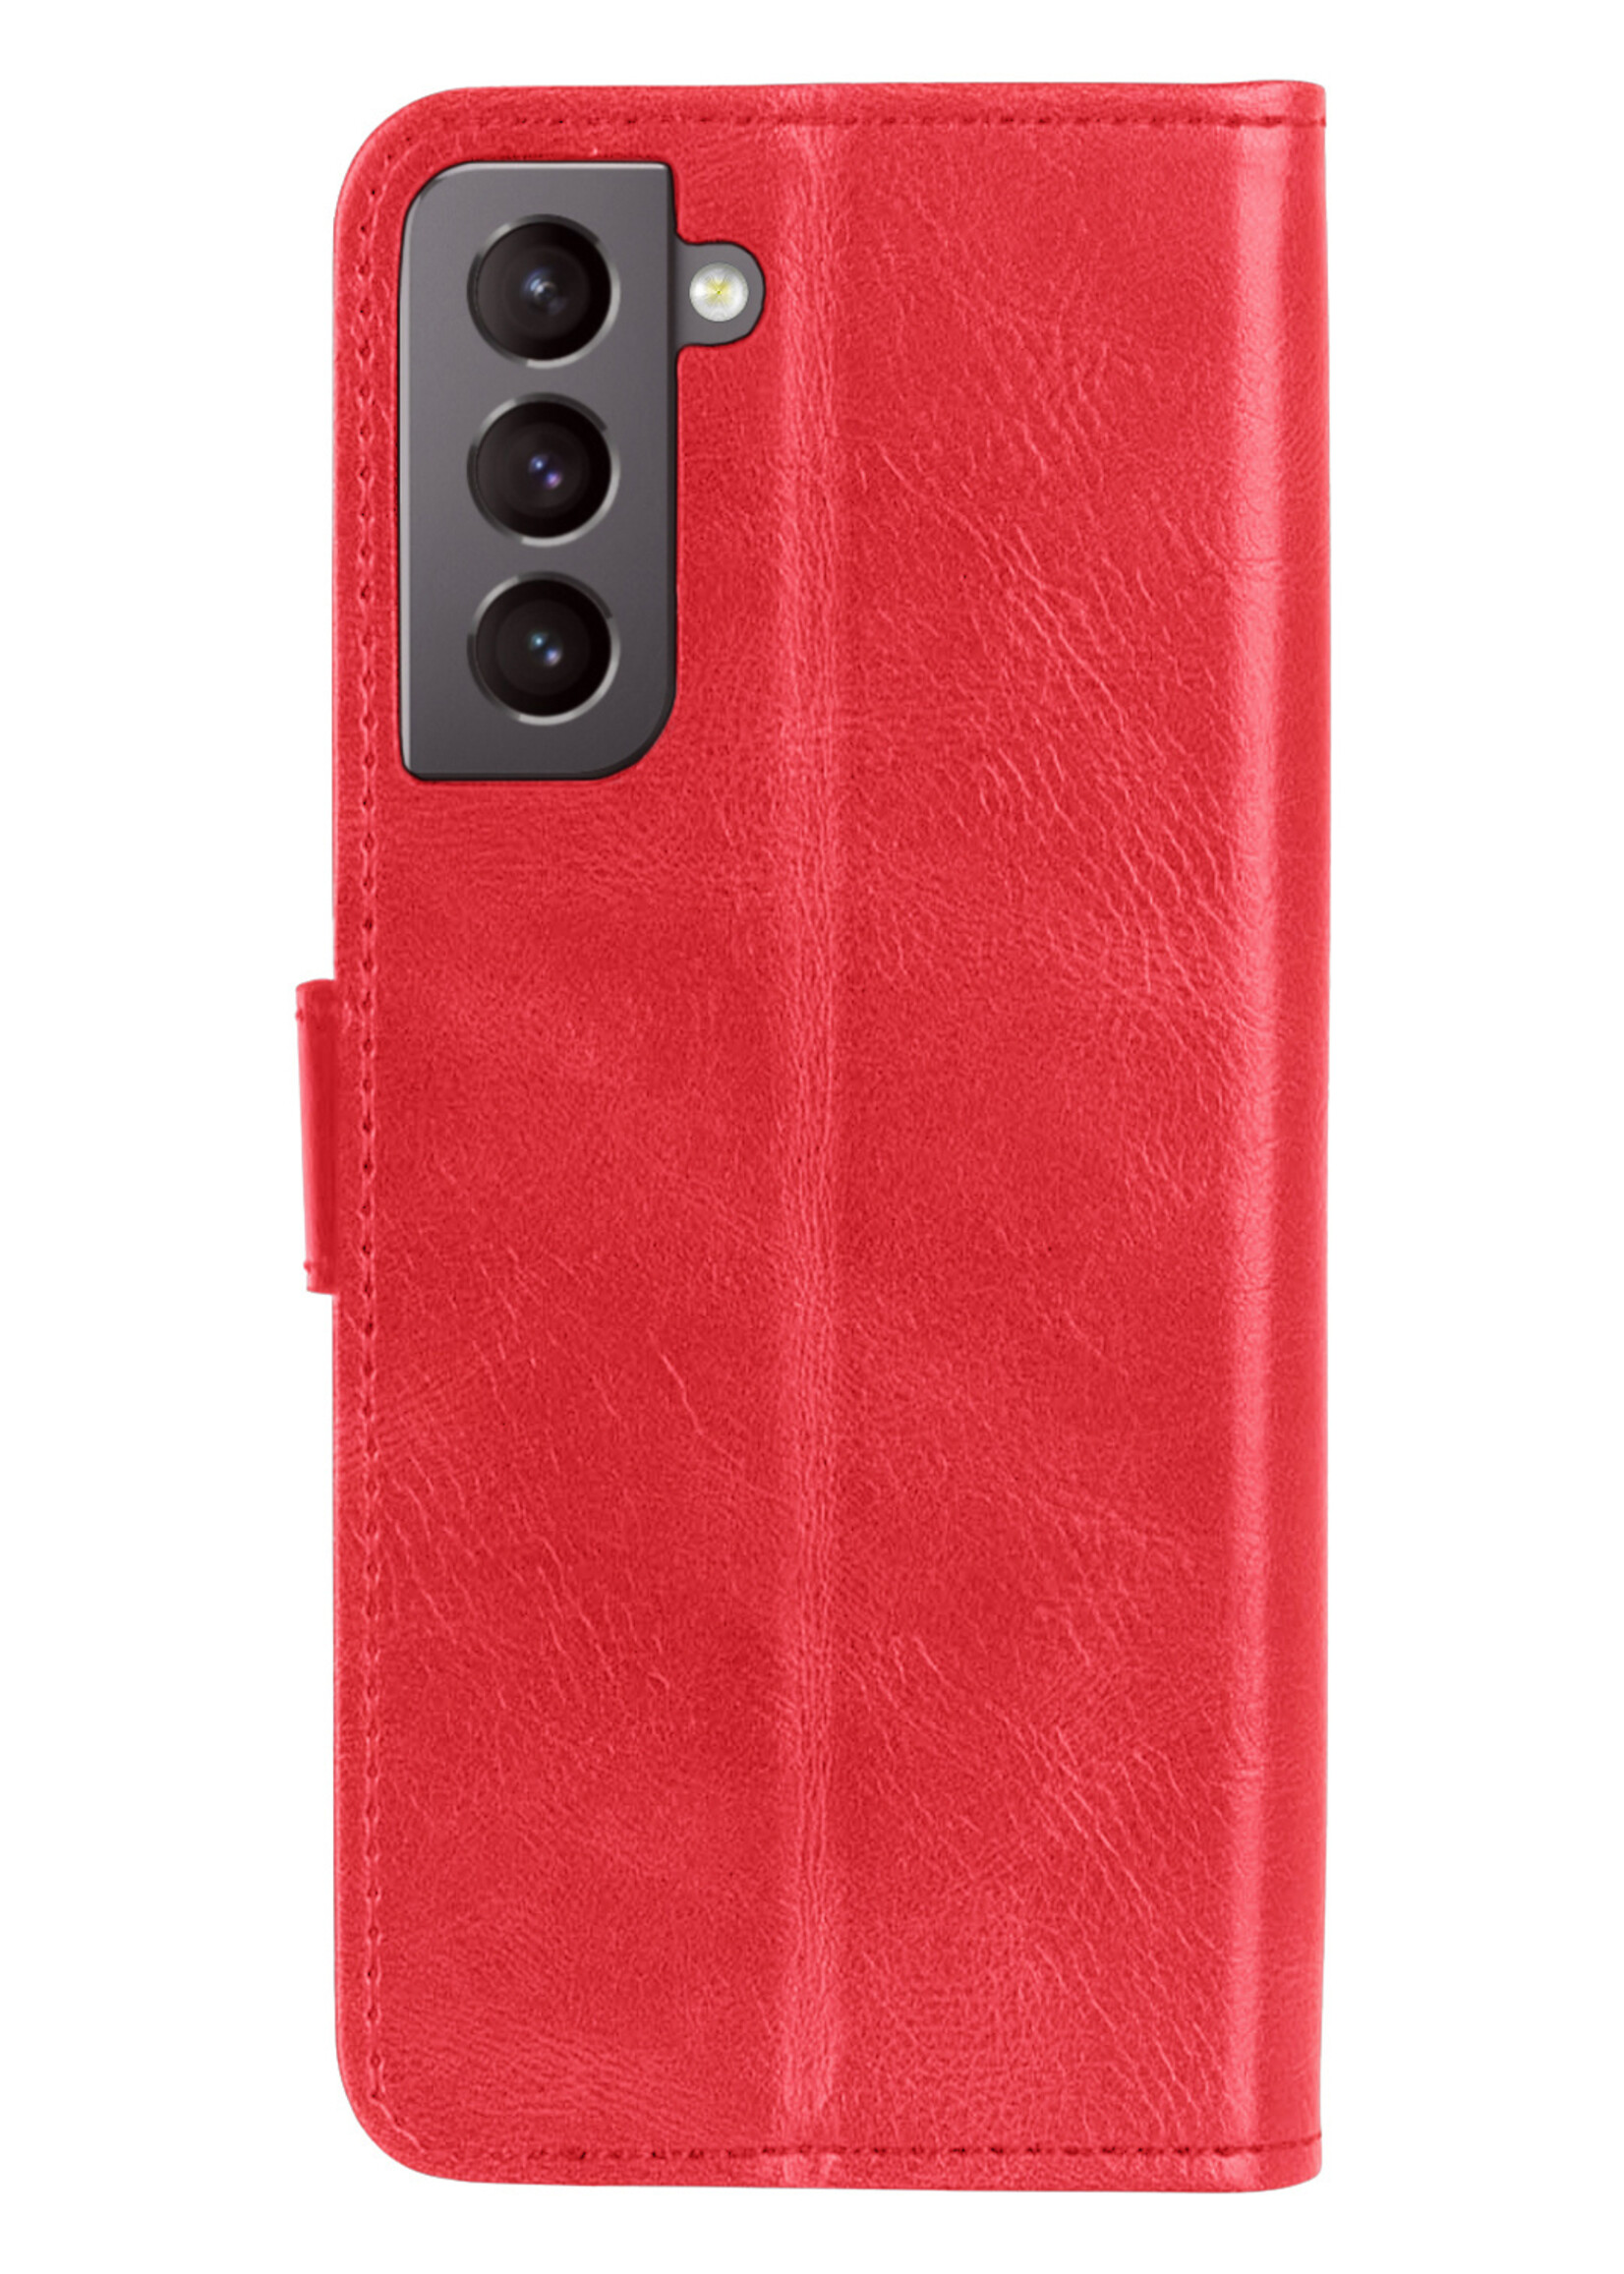 BTH Samsung S22 Hoesje Book Case Hoes - Samsung Galaxy S22 Case Hoesje Portemonnee Cover - Samsung S22 Hoes Wallet Case Hoesje - Rood